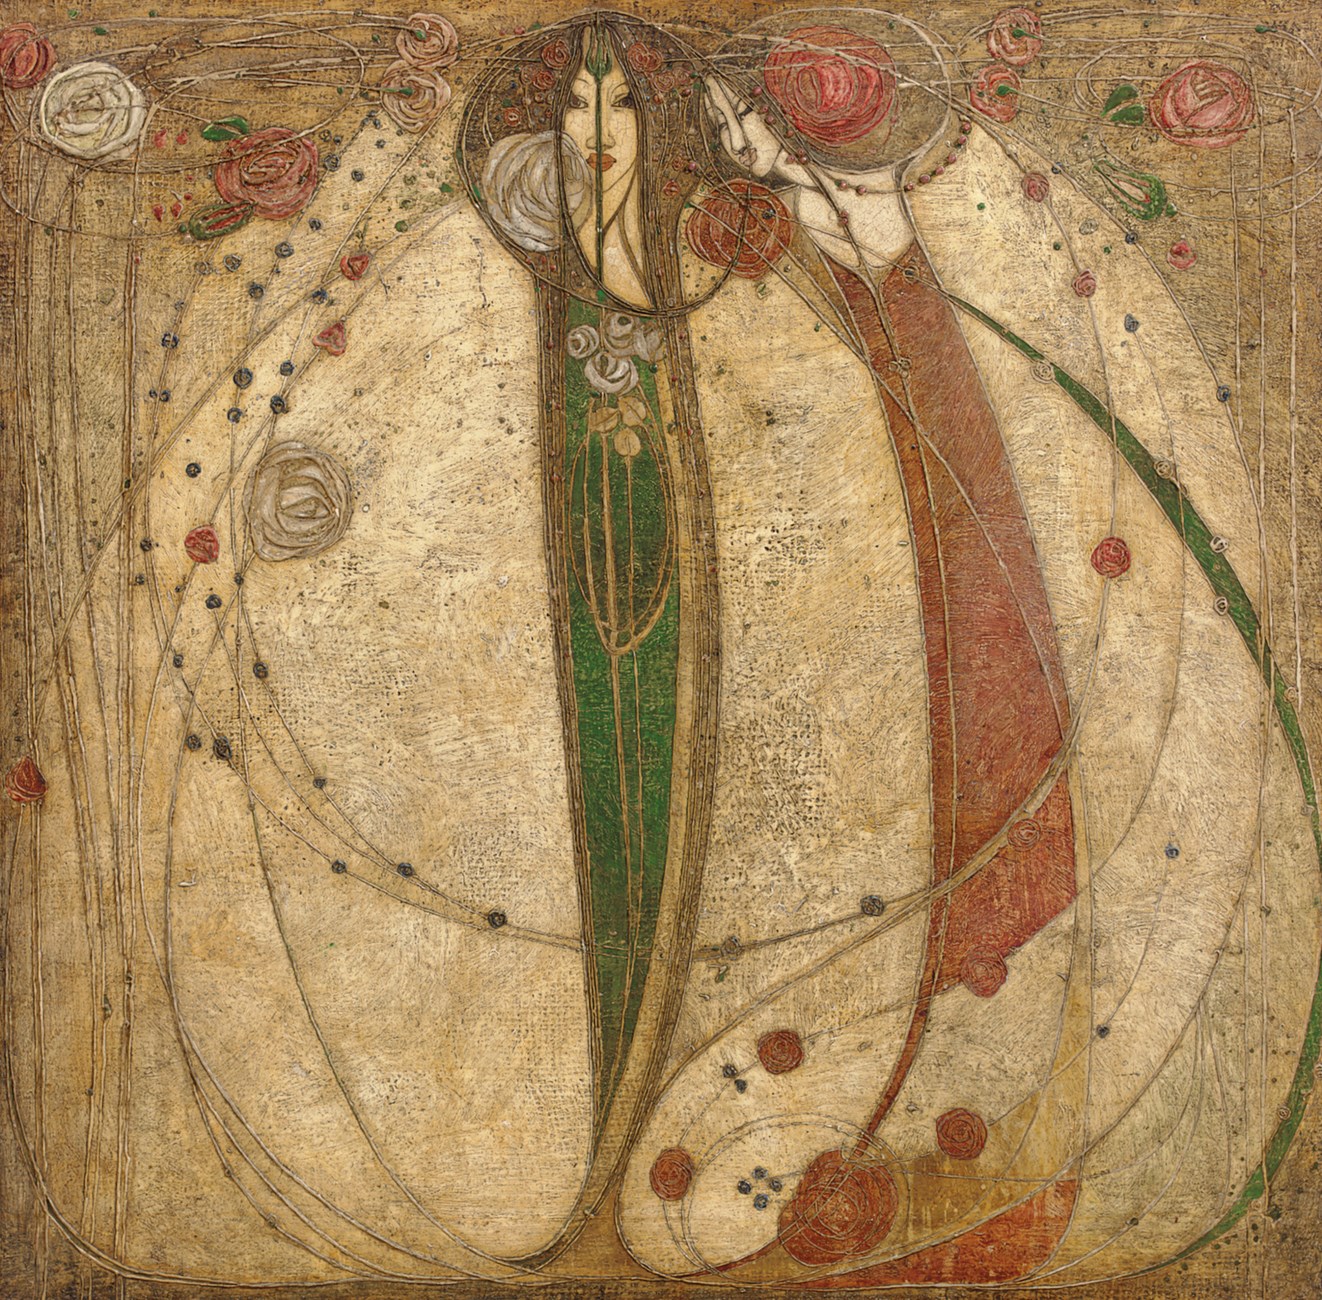 The White Rose and The Red Rose by Margaret Macdonald Mackintosh - 1902 - 97.8 cm. x 100.3 cm private collection